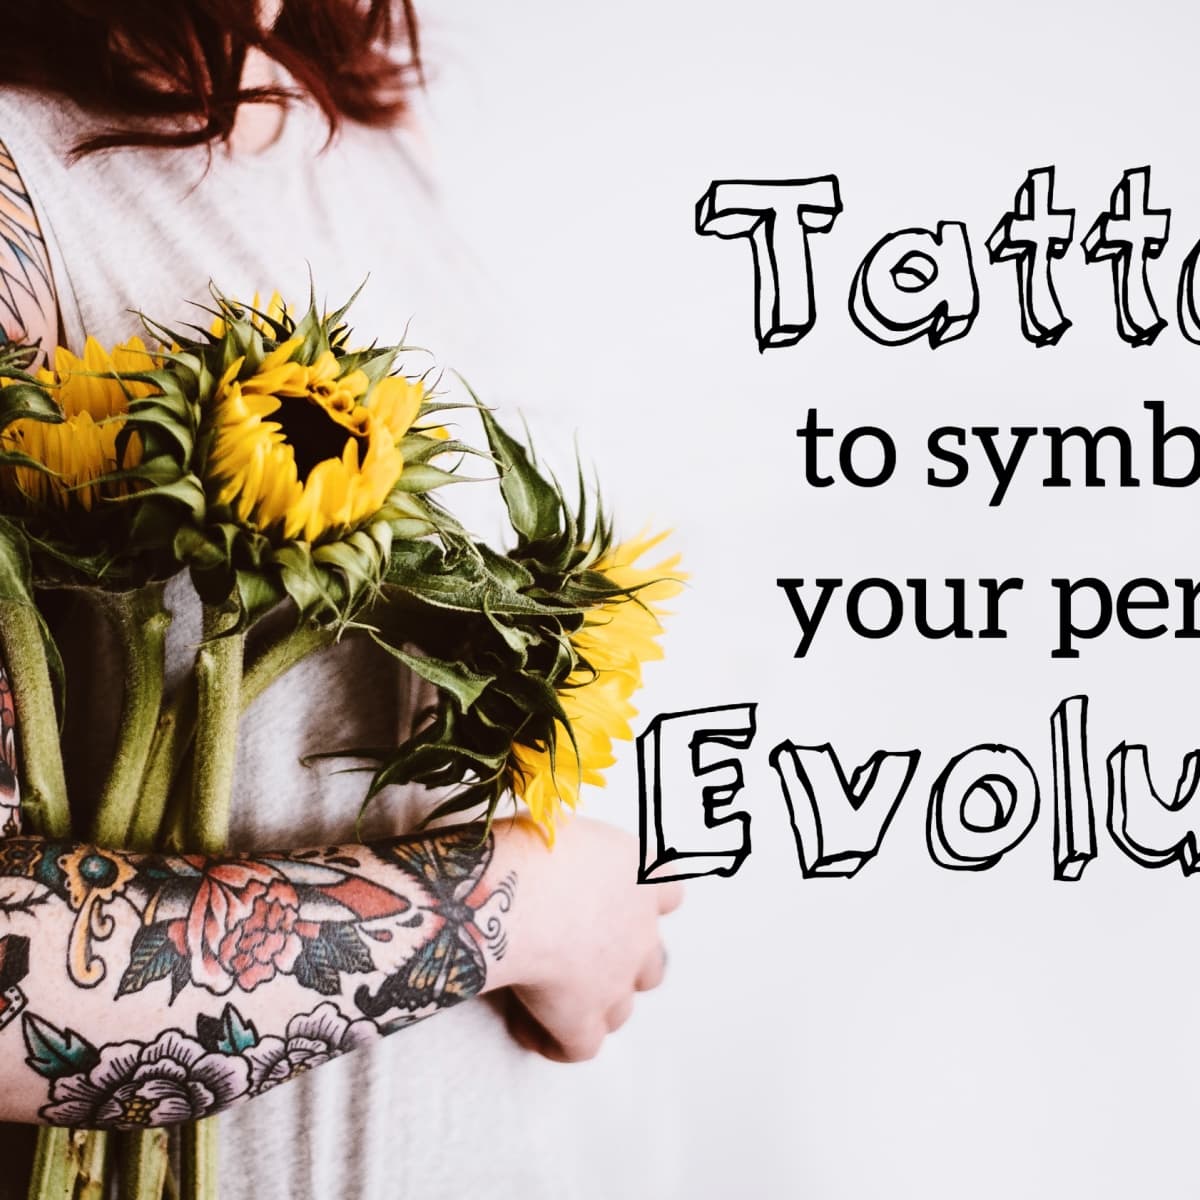 33 Sad Tattoos To Wear Your Heart On Your Sleeve  Our Mindful Life